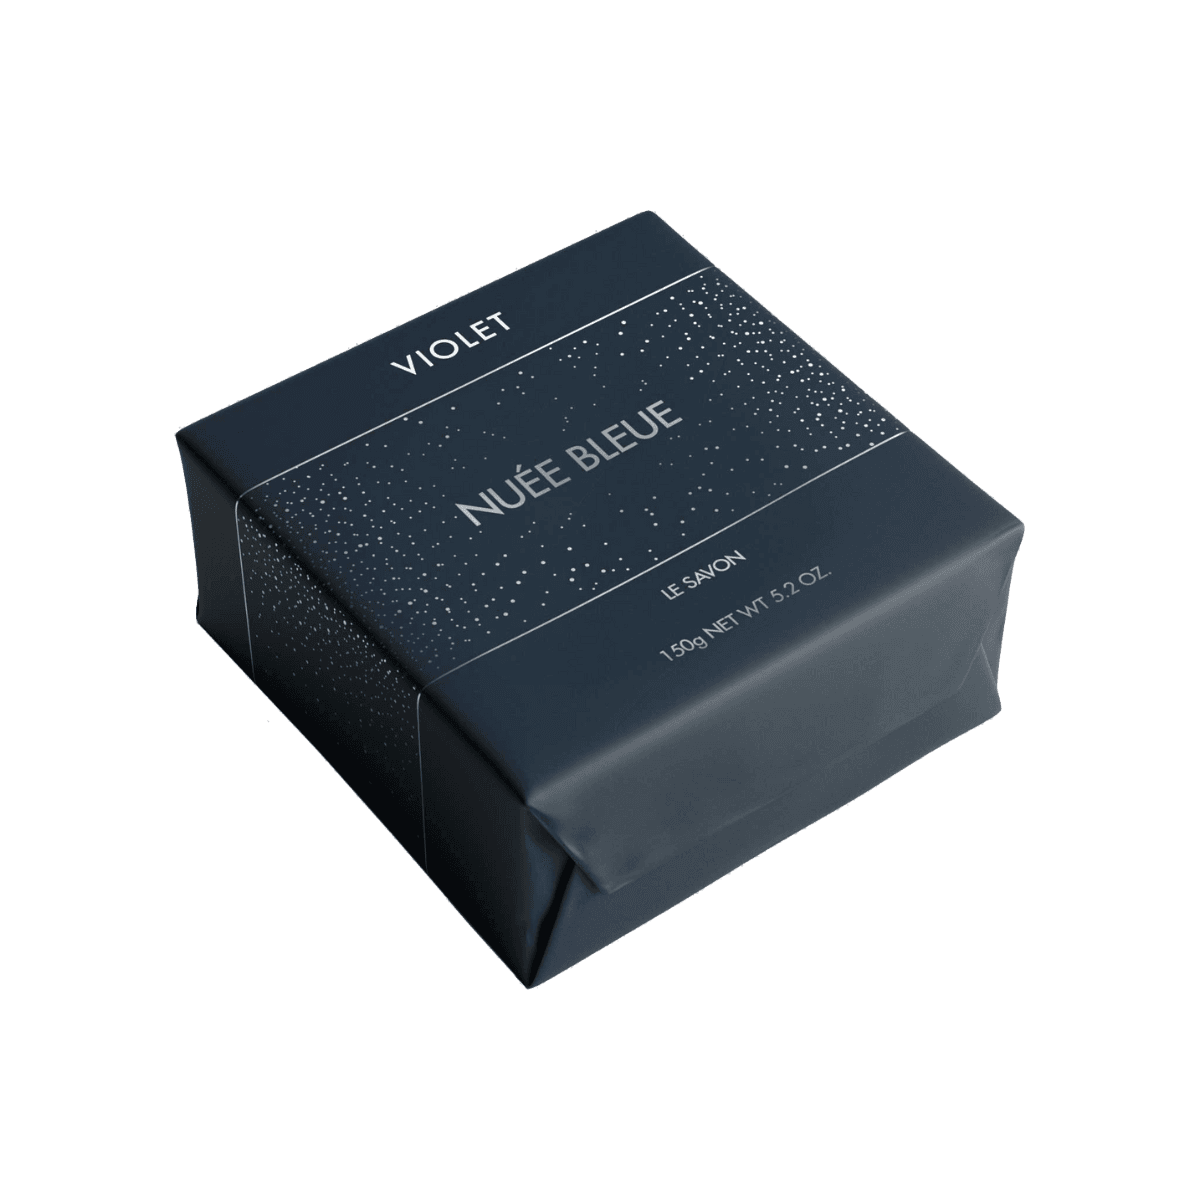 Image of Nuee Bleue soap by the perfume brand Violet